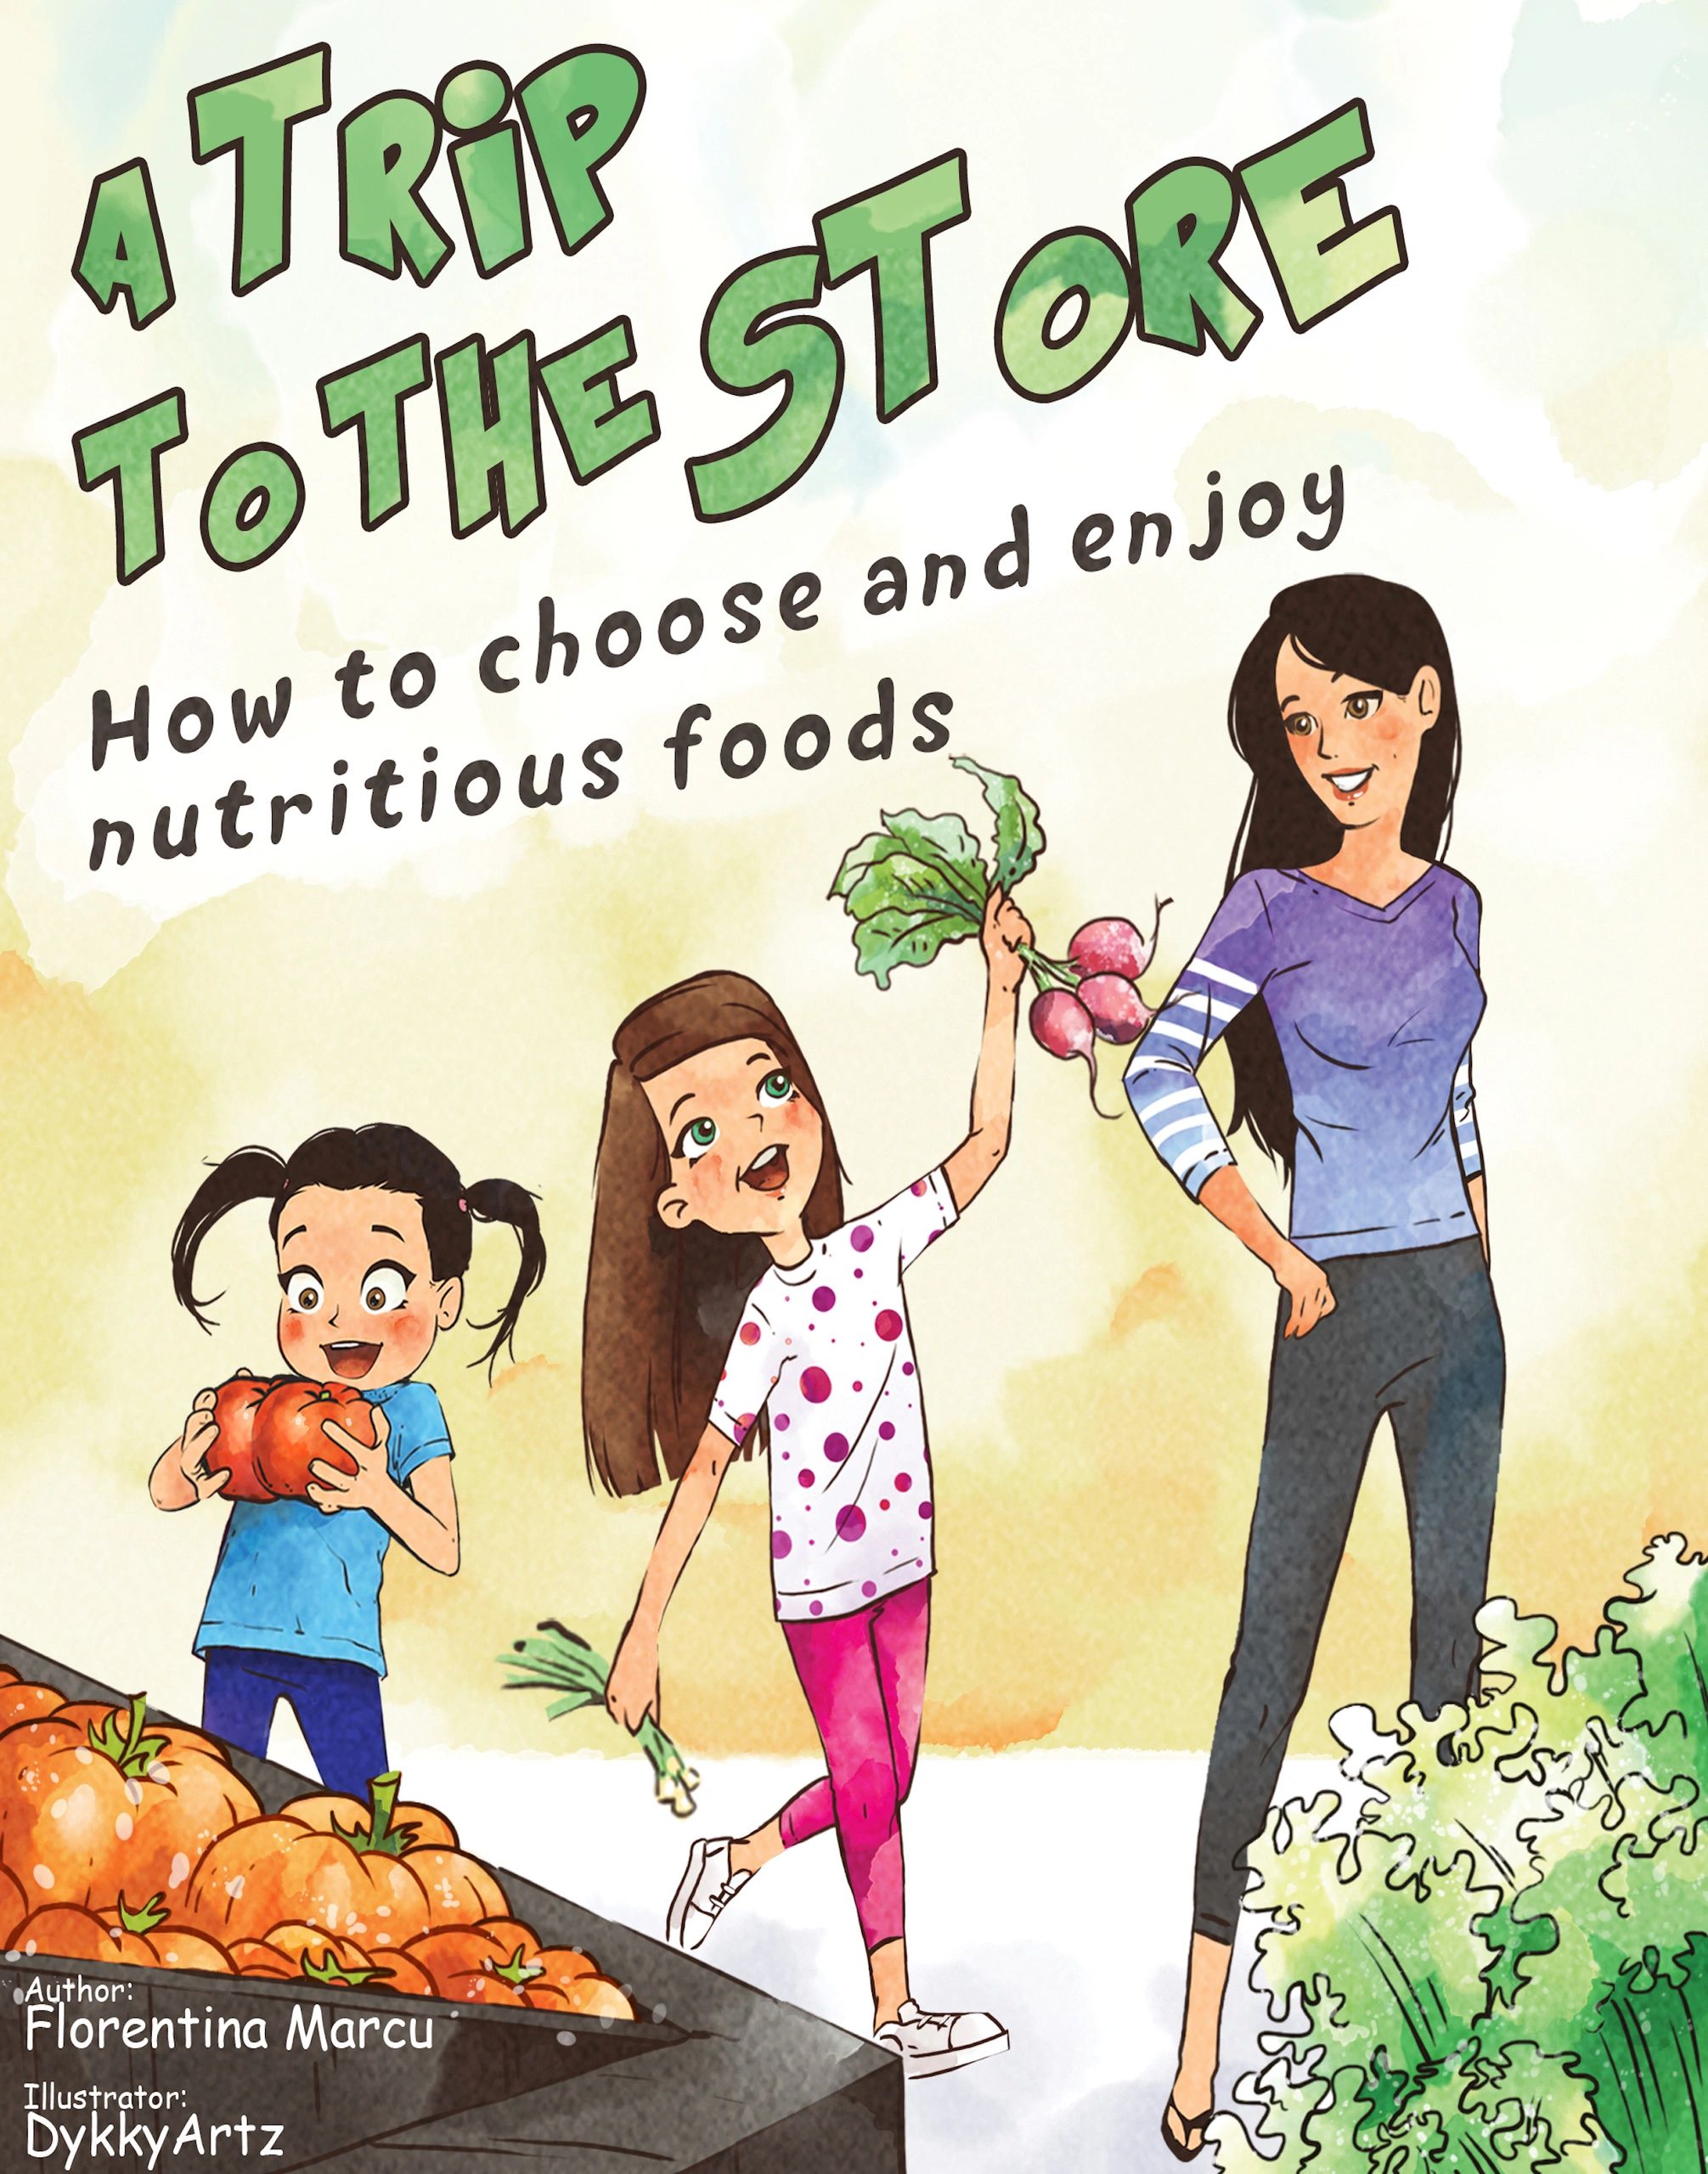 Children's book, nutrition, healthy eating, reading labels